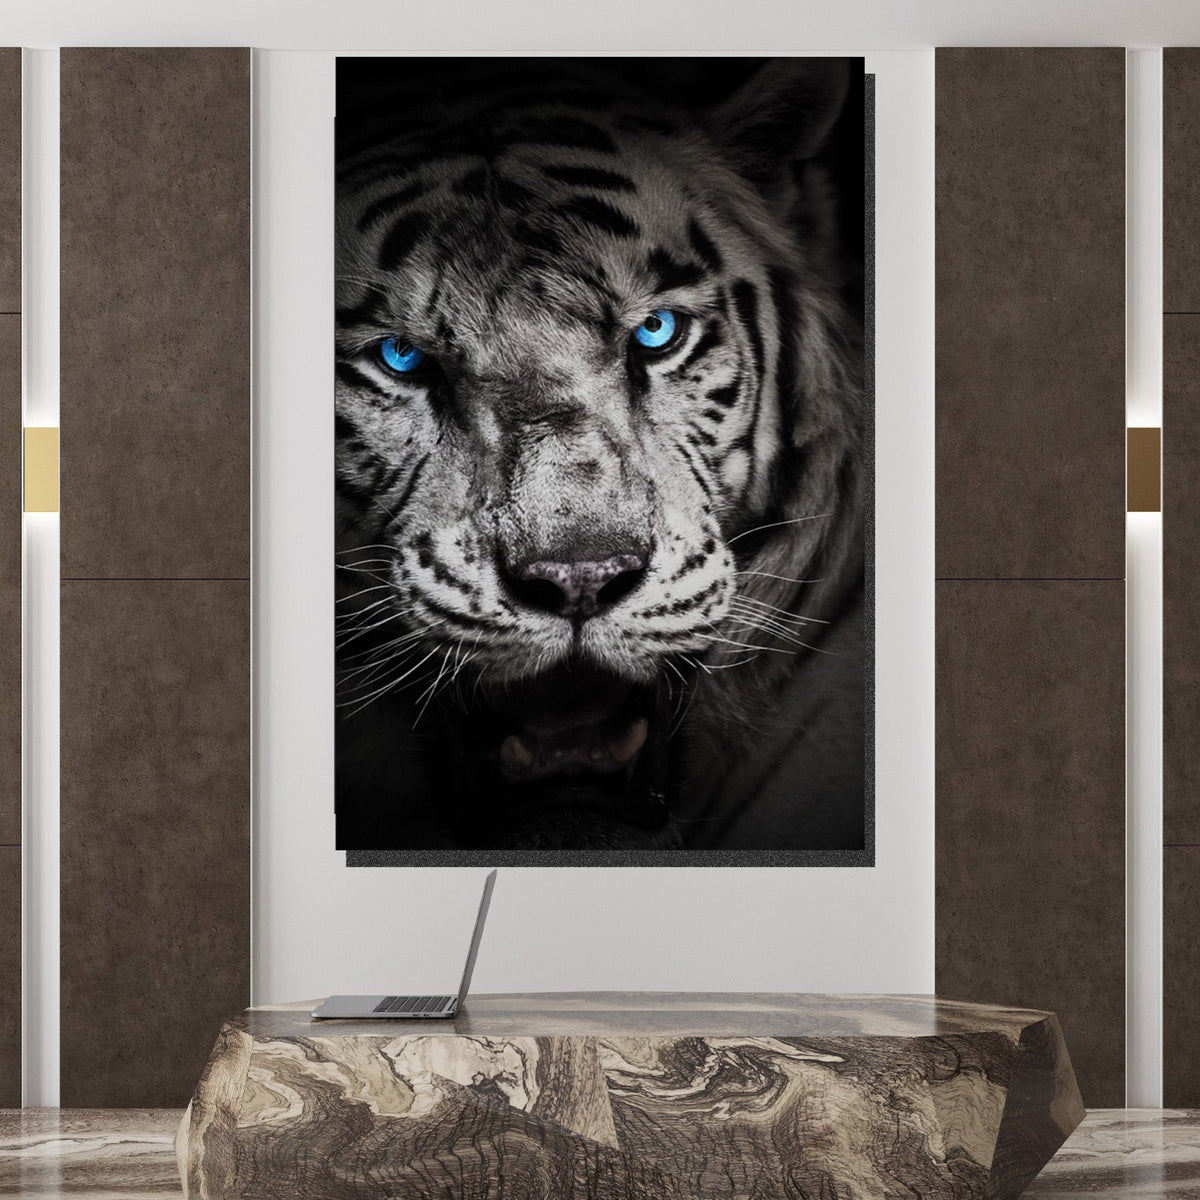 https://cdn.shopify.com/s/files/1/0387/9986/8044/products/BlueEyedTigerCanvasArtprintStretched-3.jpg